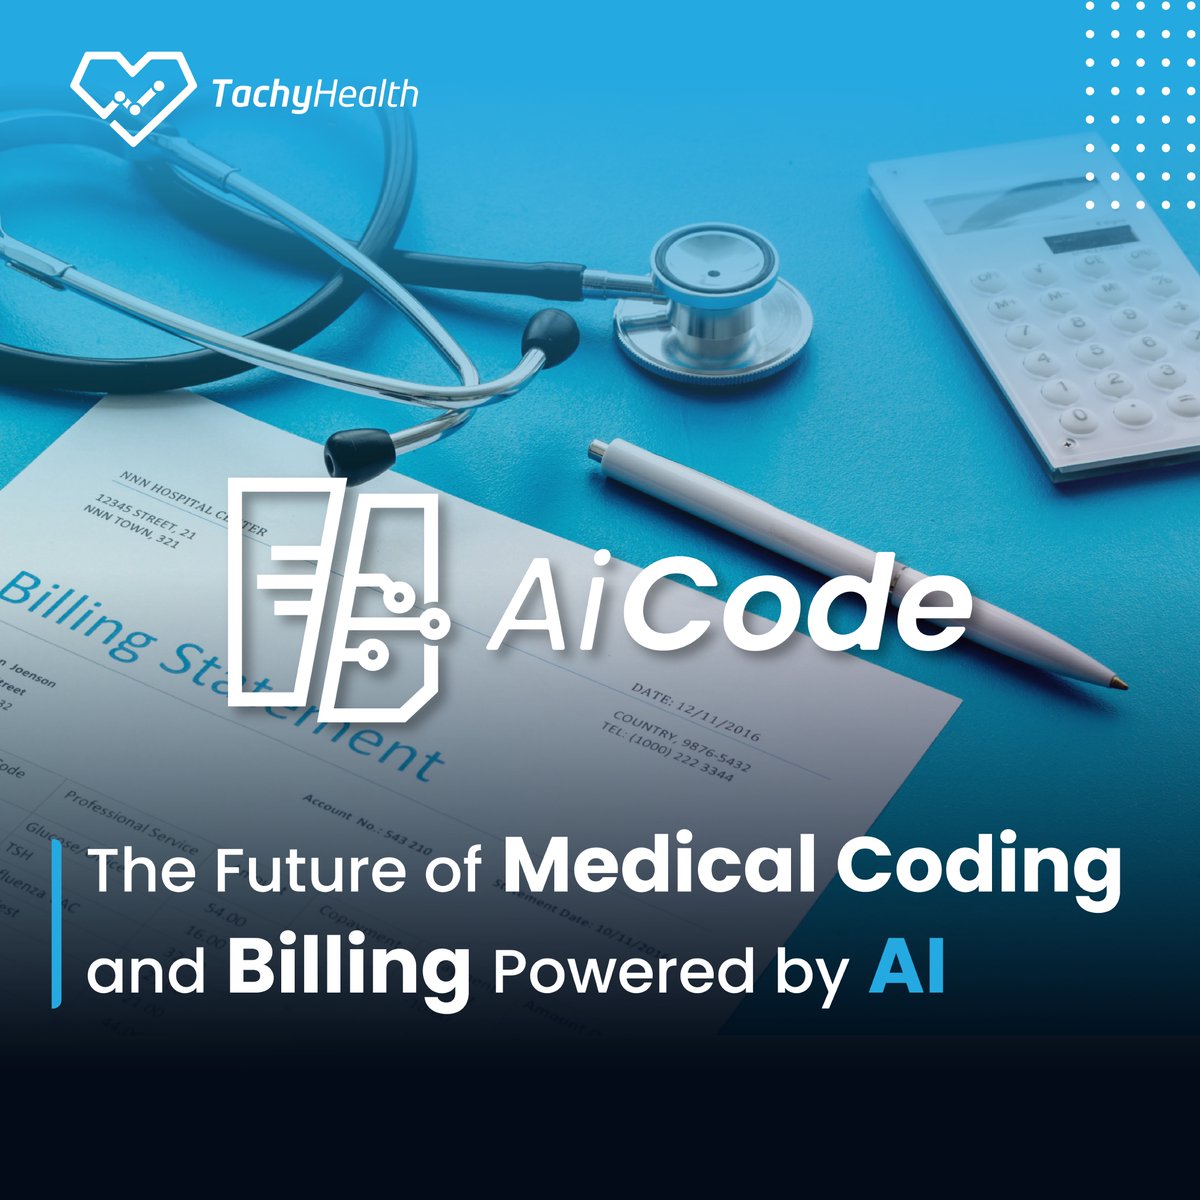 The future of medical billing is here with Aicode: Revolutionizing healthcare one code at a time! 🚀 Check out our latest blog post now! 🔔

#AIcode
#BillingRevolution
#CodingPoweredByAI
#DigitalHealth
#AIInnovation
#MedicalBillingTech
#FutureOfHealthcare

tachyhealth.com/blog-detail?ti…